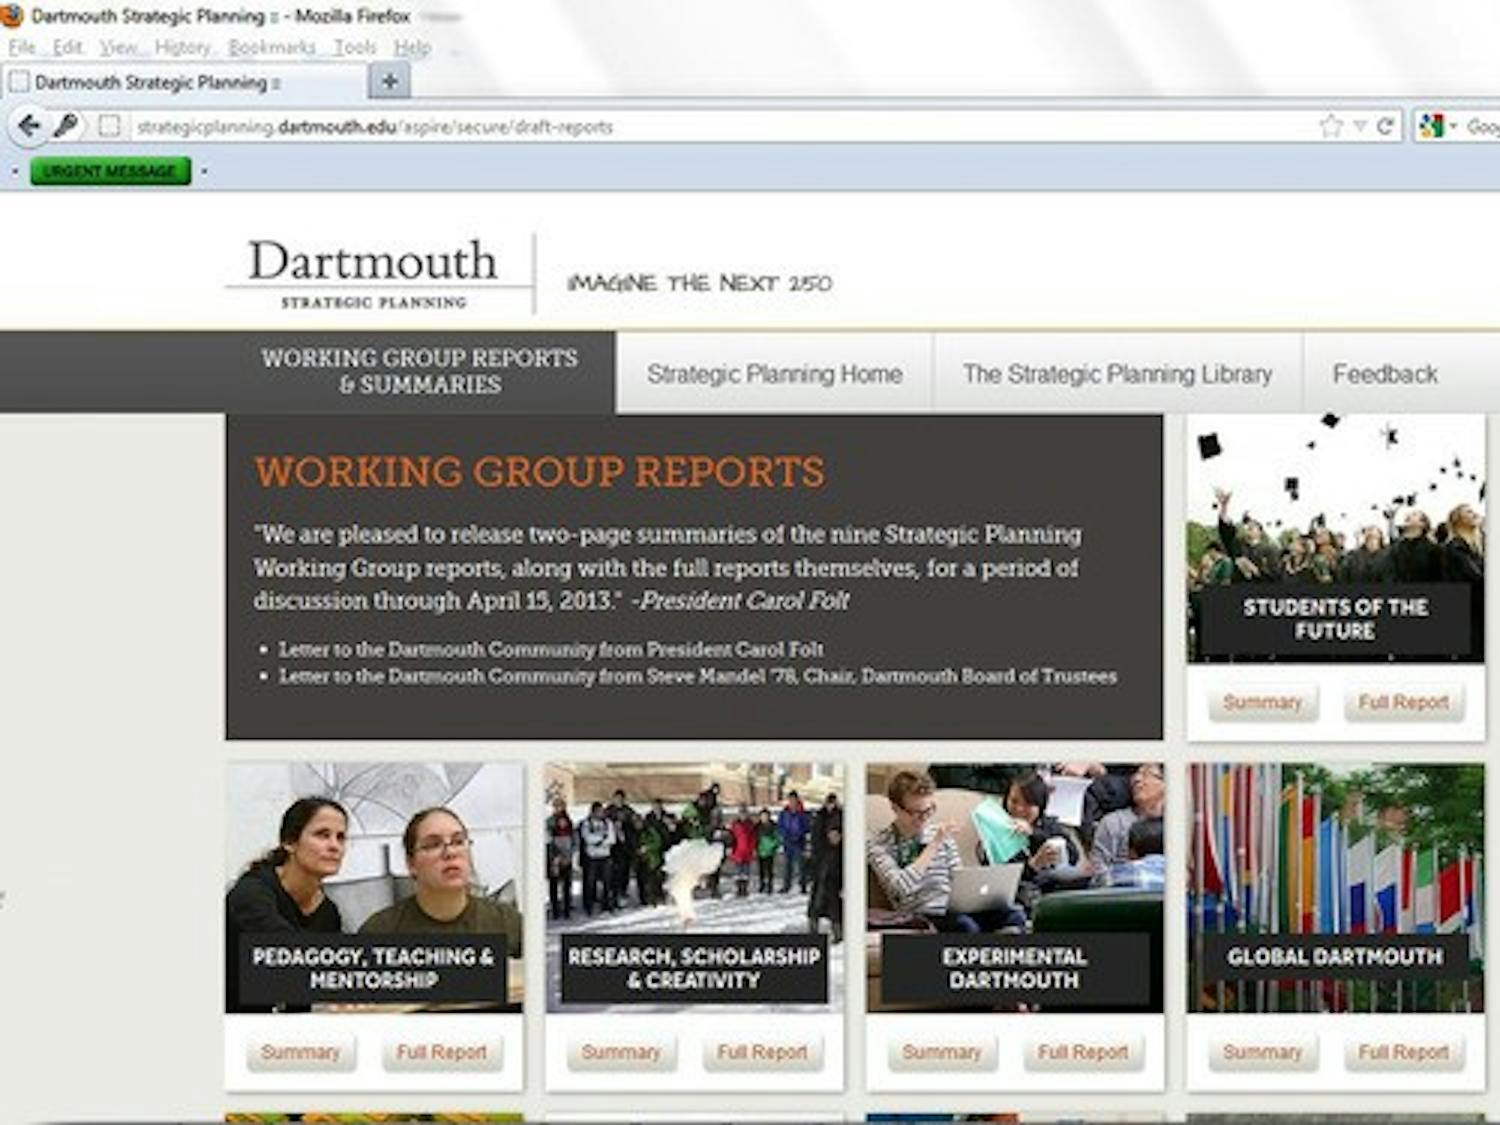 The strategic planning committees are accepting feedback from College faculty, student and alumni on ideas presented in the working group reports until April 15. The reports are available on the strategic planning website to members of the Dartmouth community. 